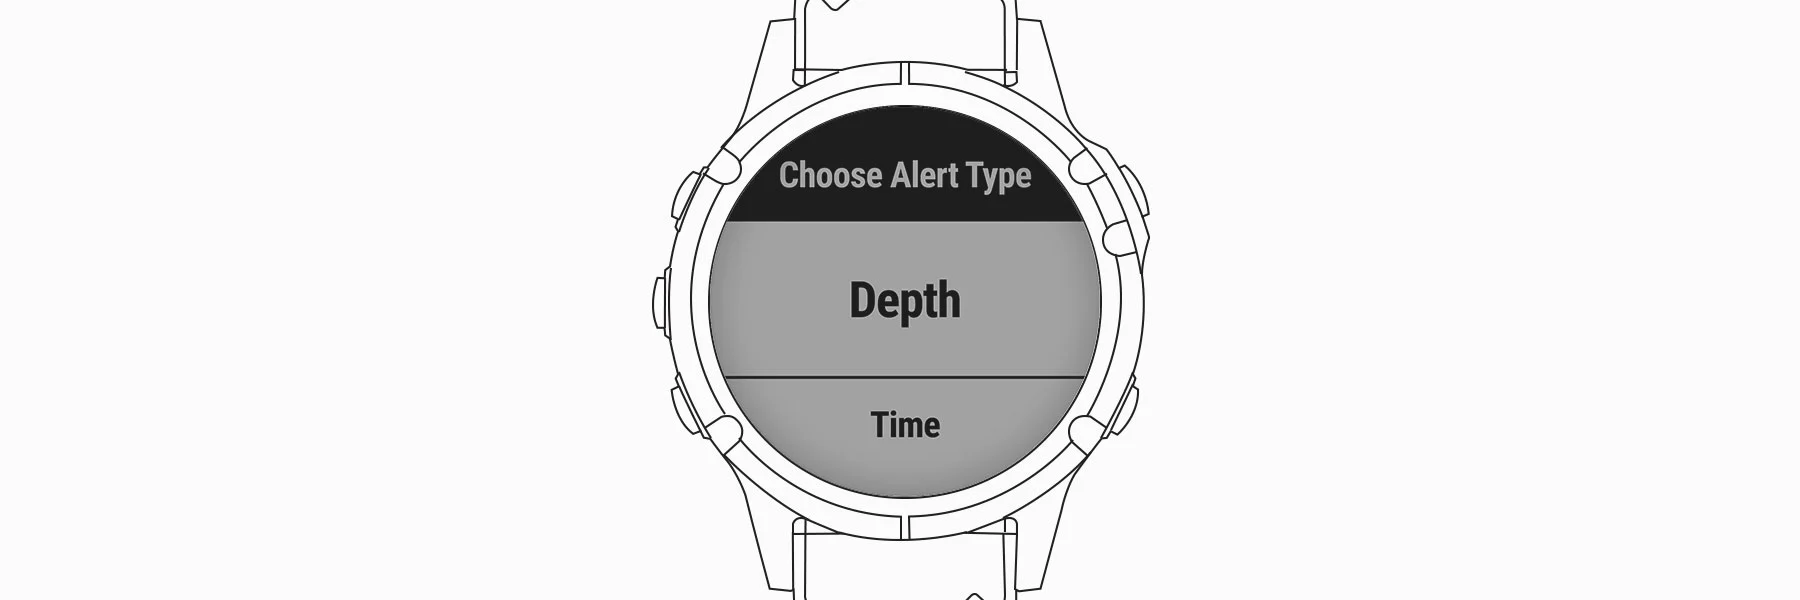 Depth and Time Alerting